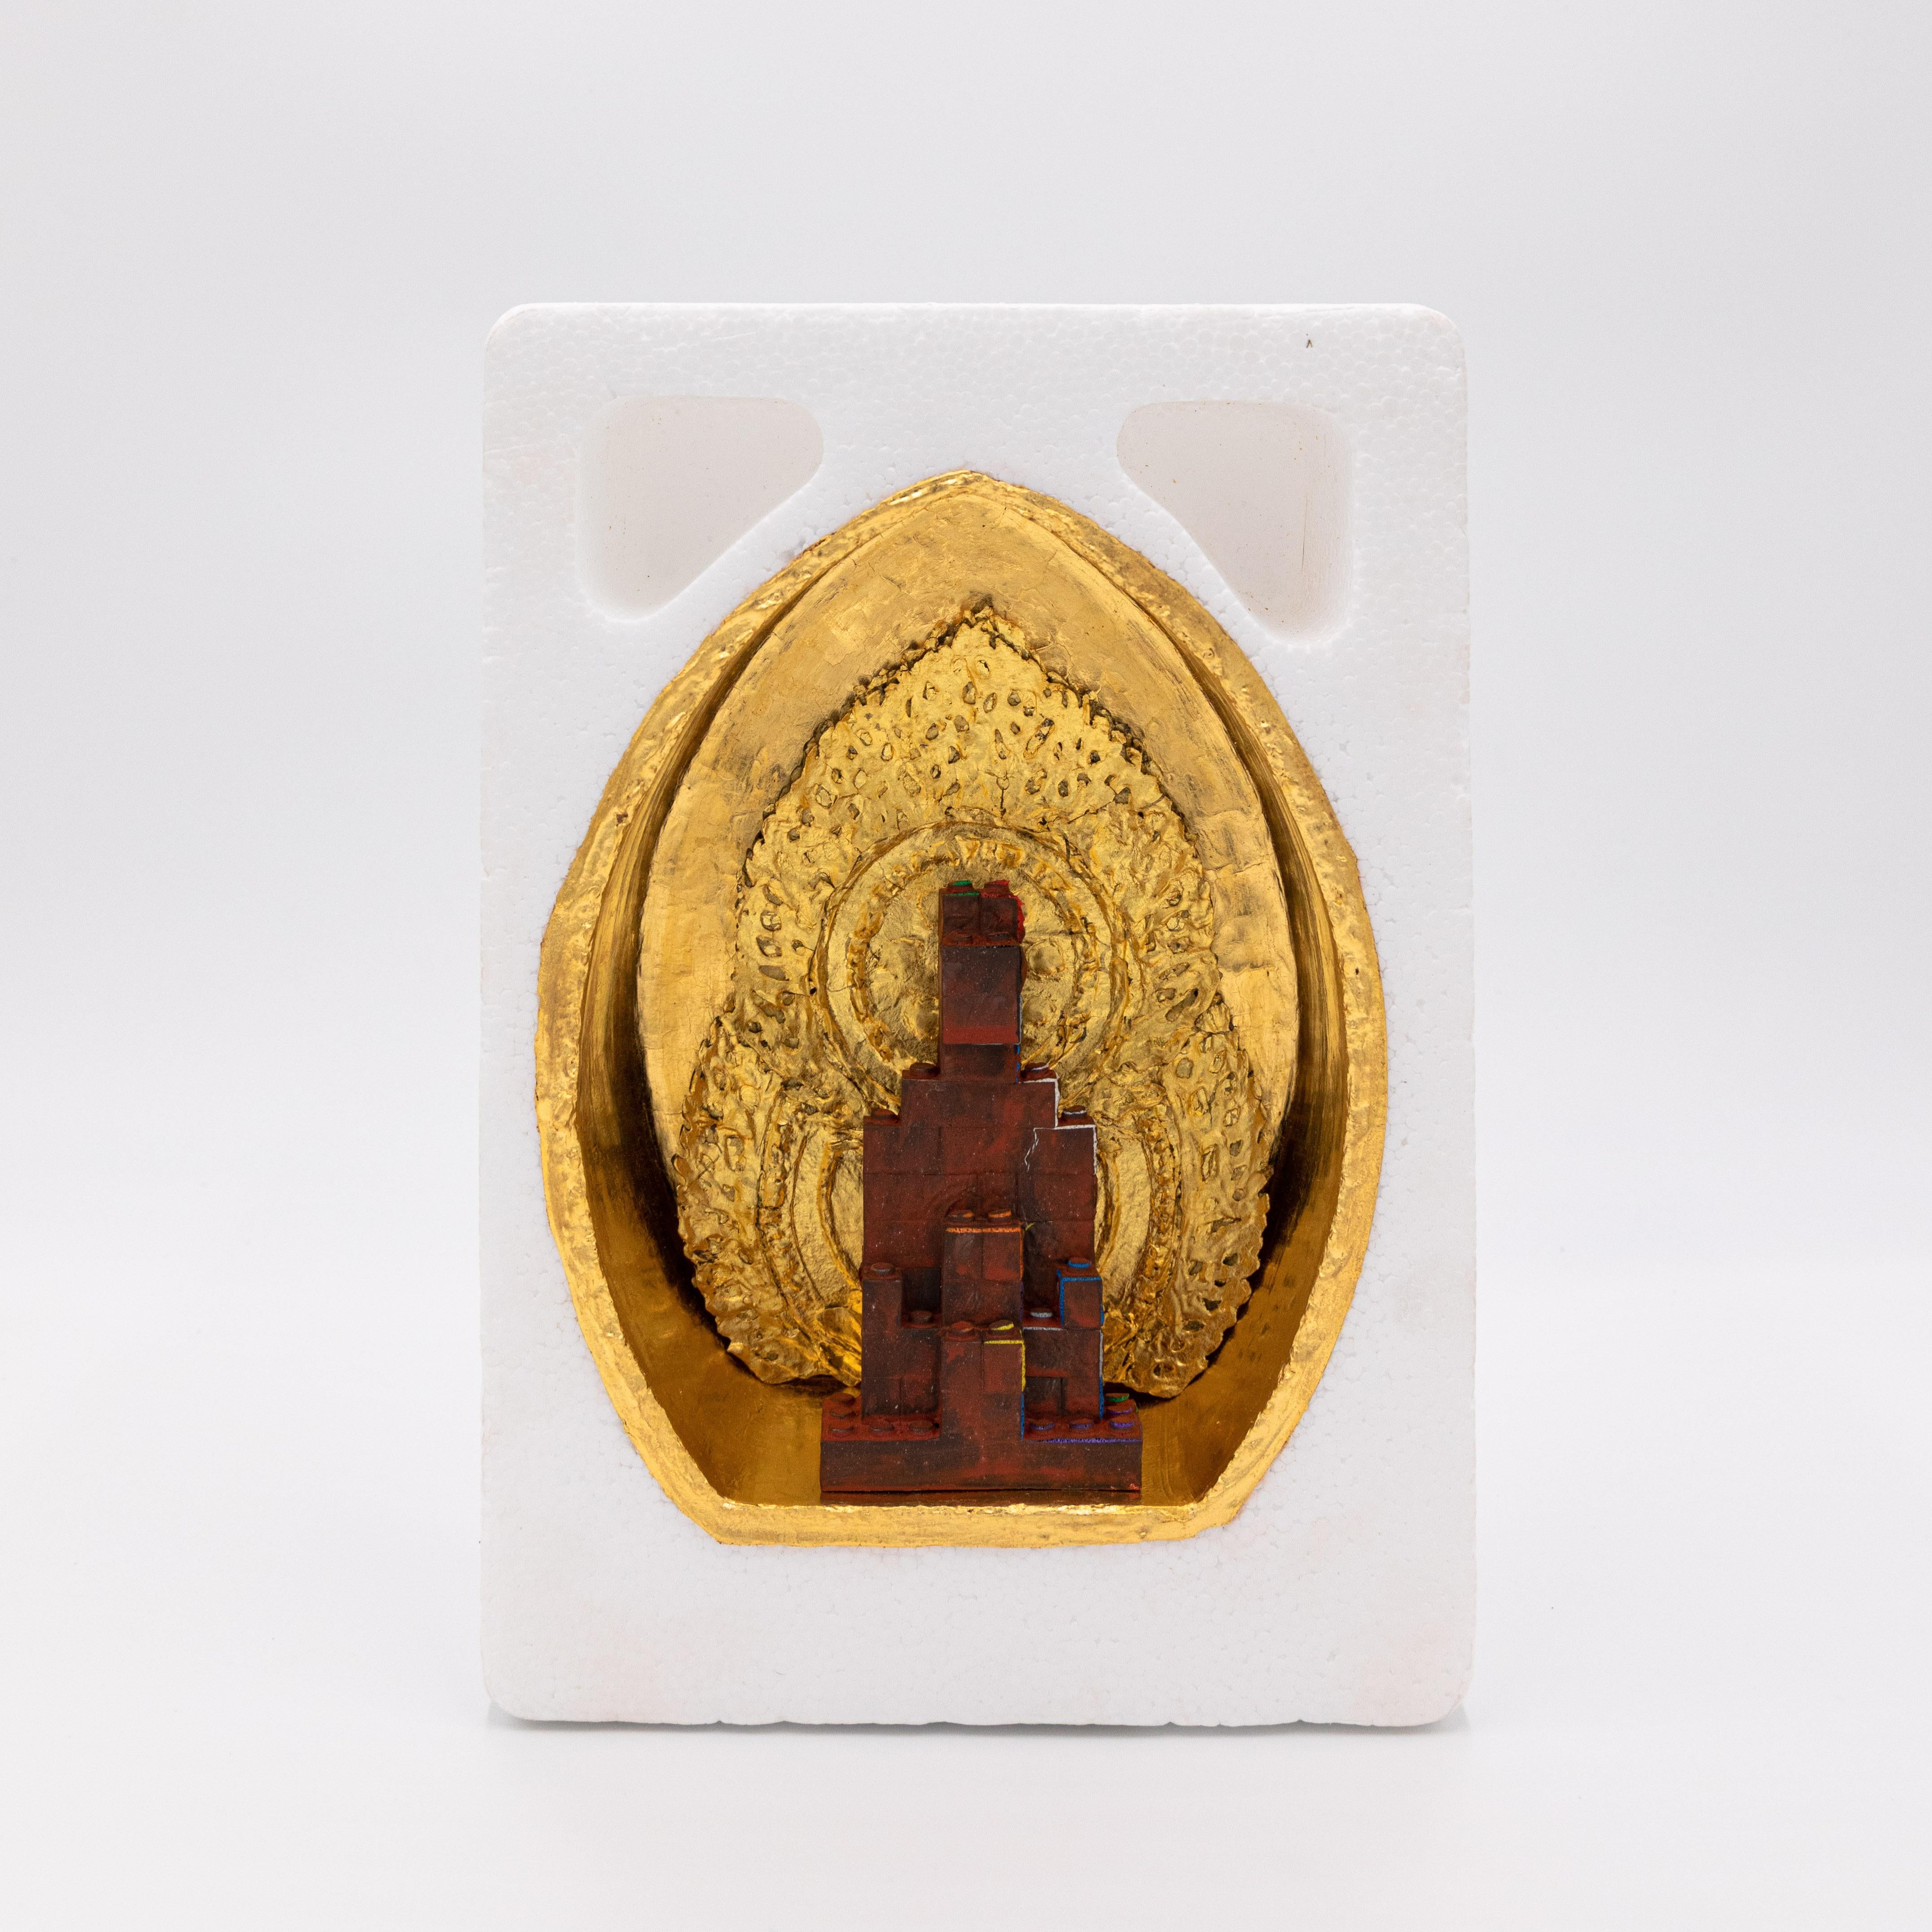 Lego, gold leaf, Styrofoam, paper, cardboard, gilder’s bole

This work was created for an exhibit as part of the artistic unit SHIKŌ, a collaborative effort between sculptors Kanji Hasegawa, Isaji Yugo, and Kojun.

The pieces transform everyday